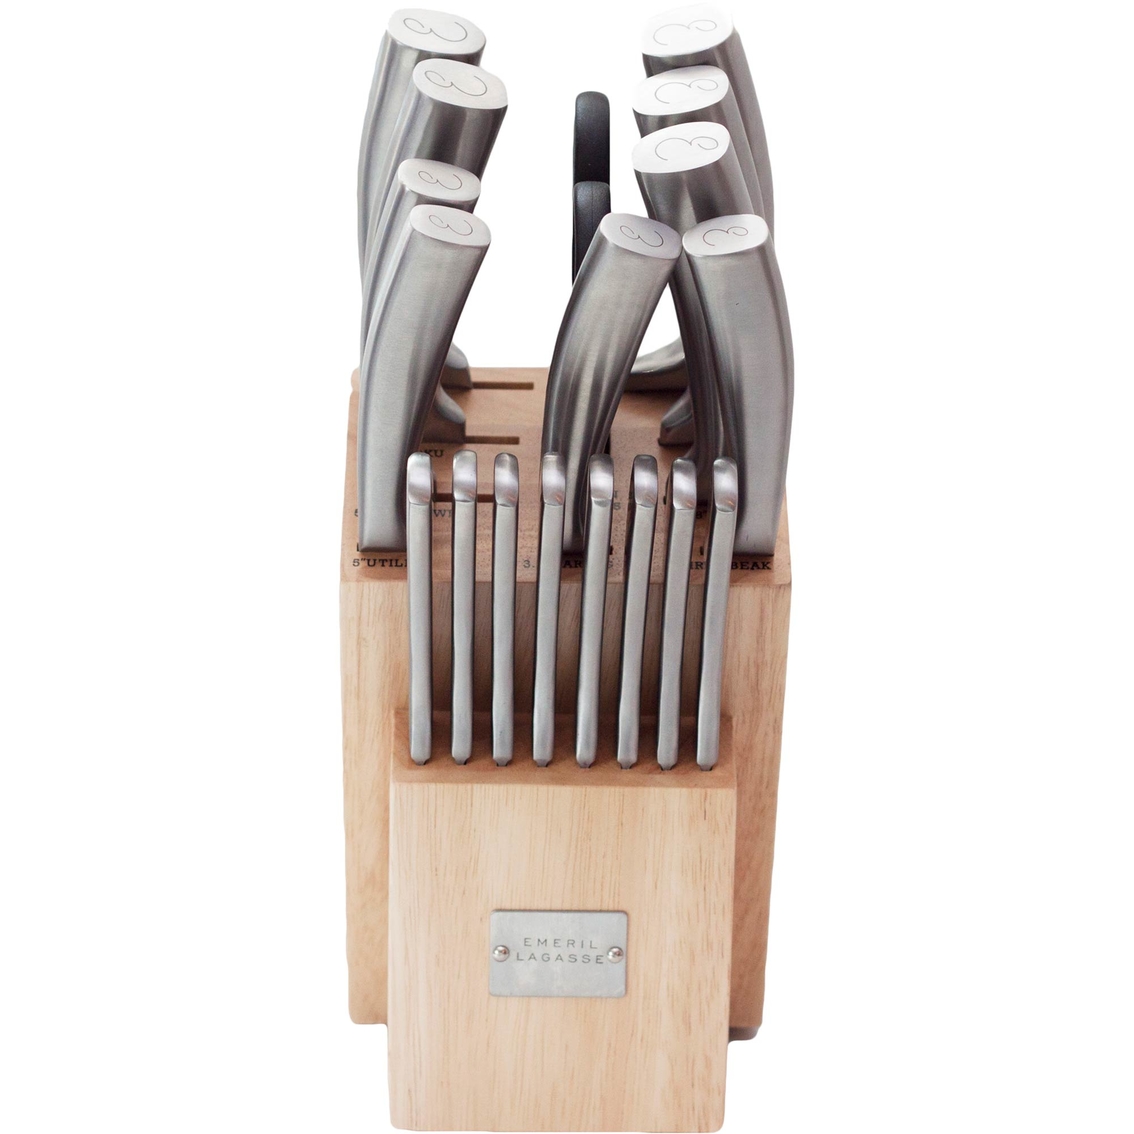 Emeril 19 Pc. Knife Block Set with Hollow Handles - Image 2 of 2